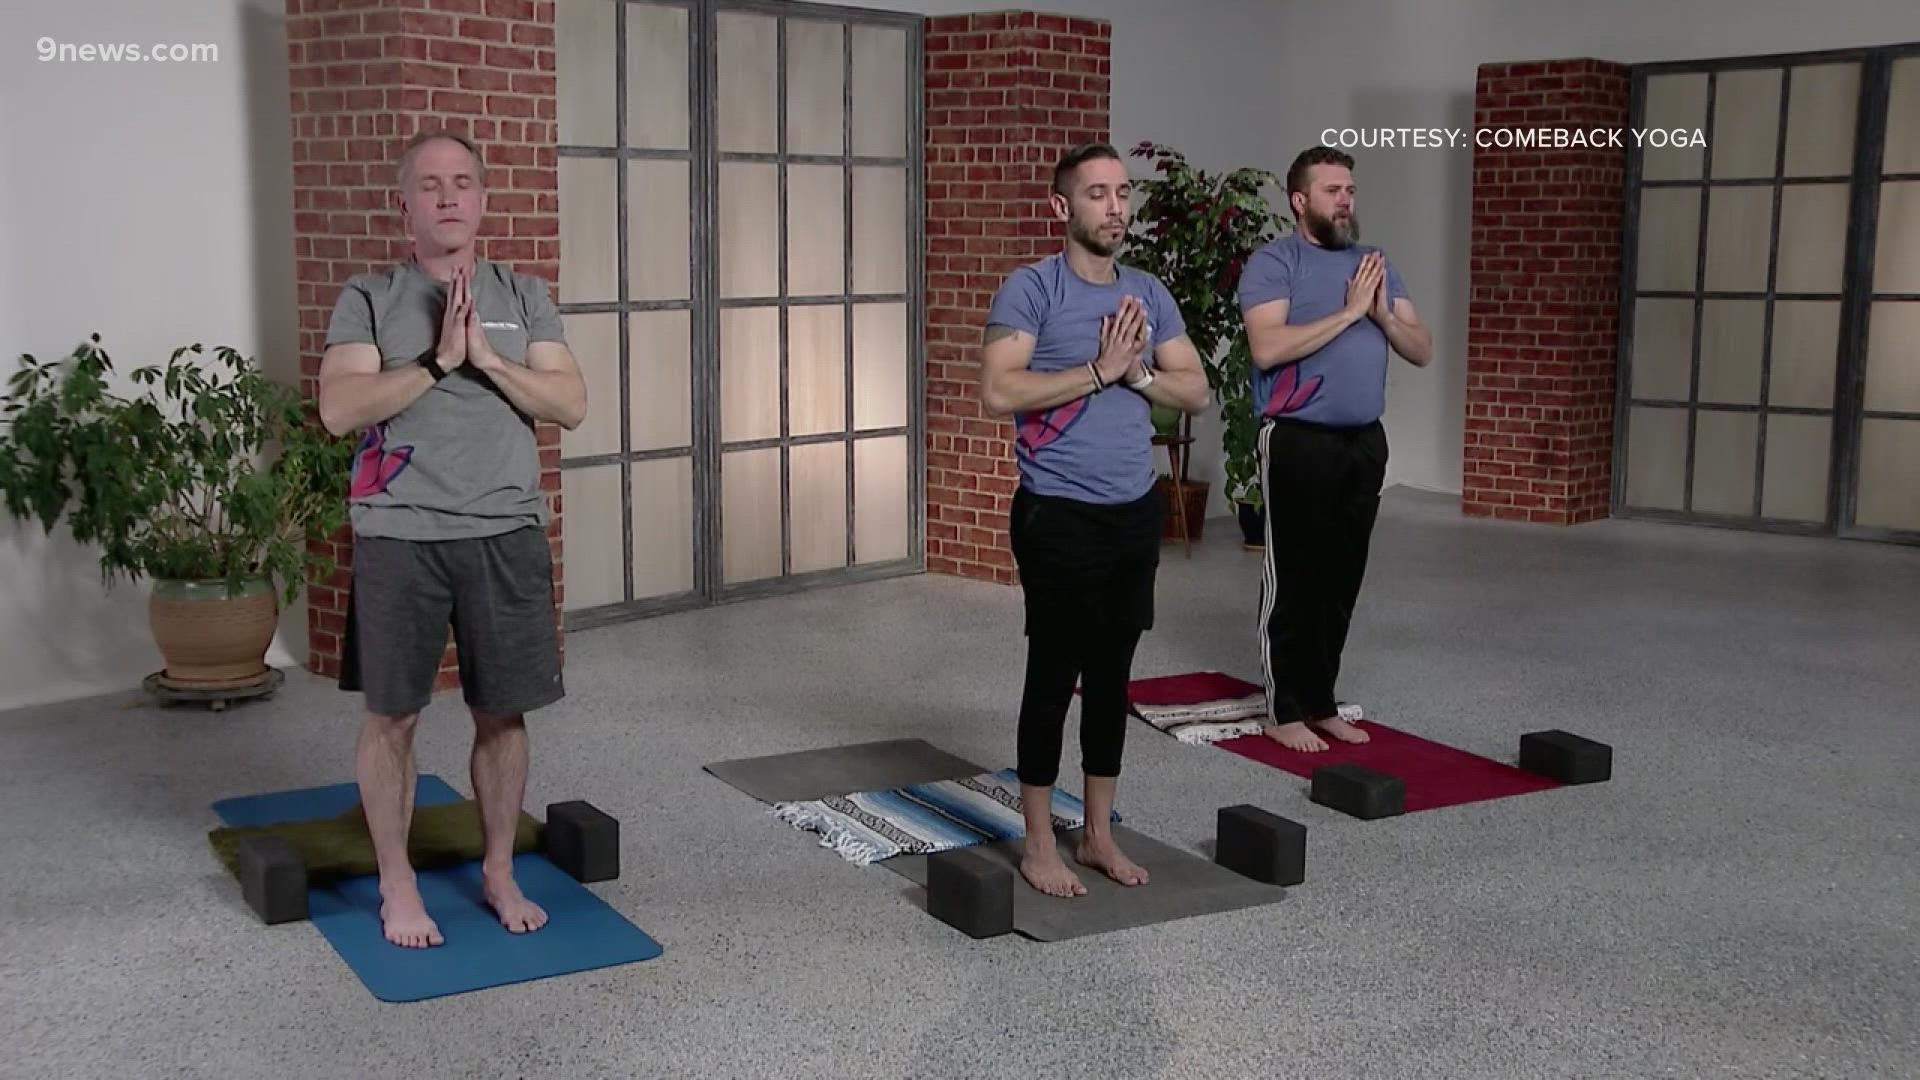 Veterans adjusting to life after service can get help dealing with post-traumatic stress through yoga classes.